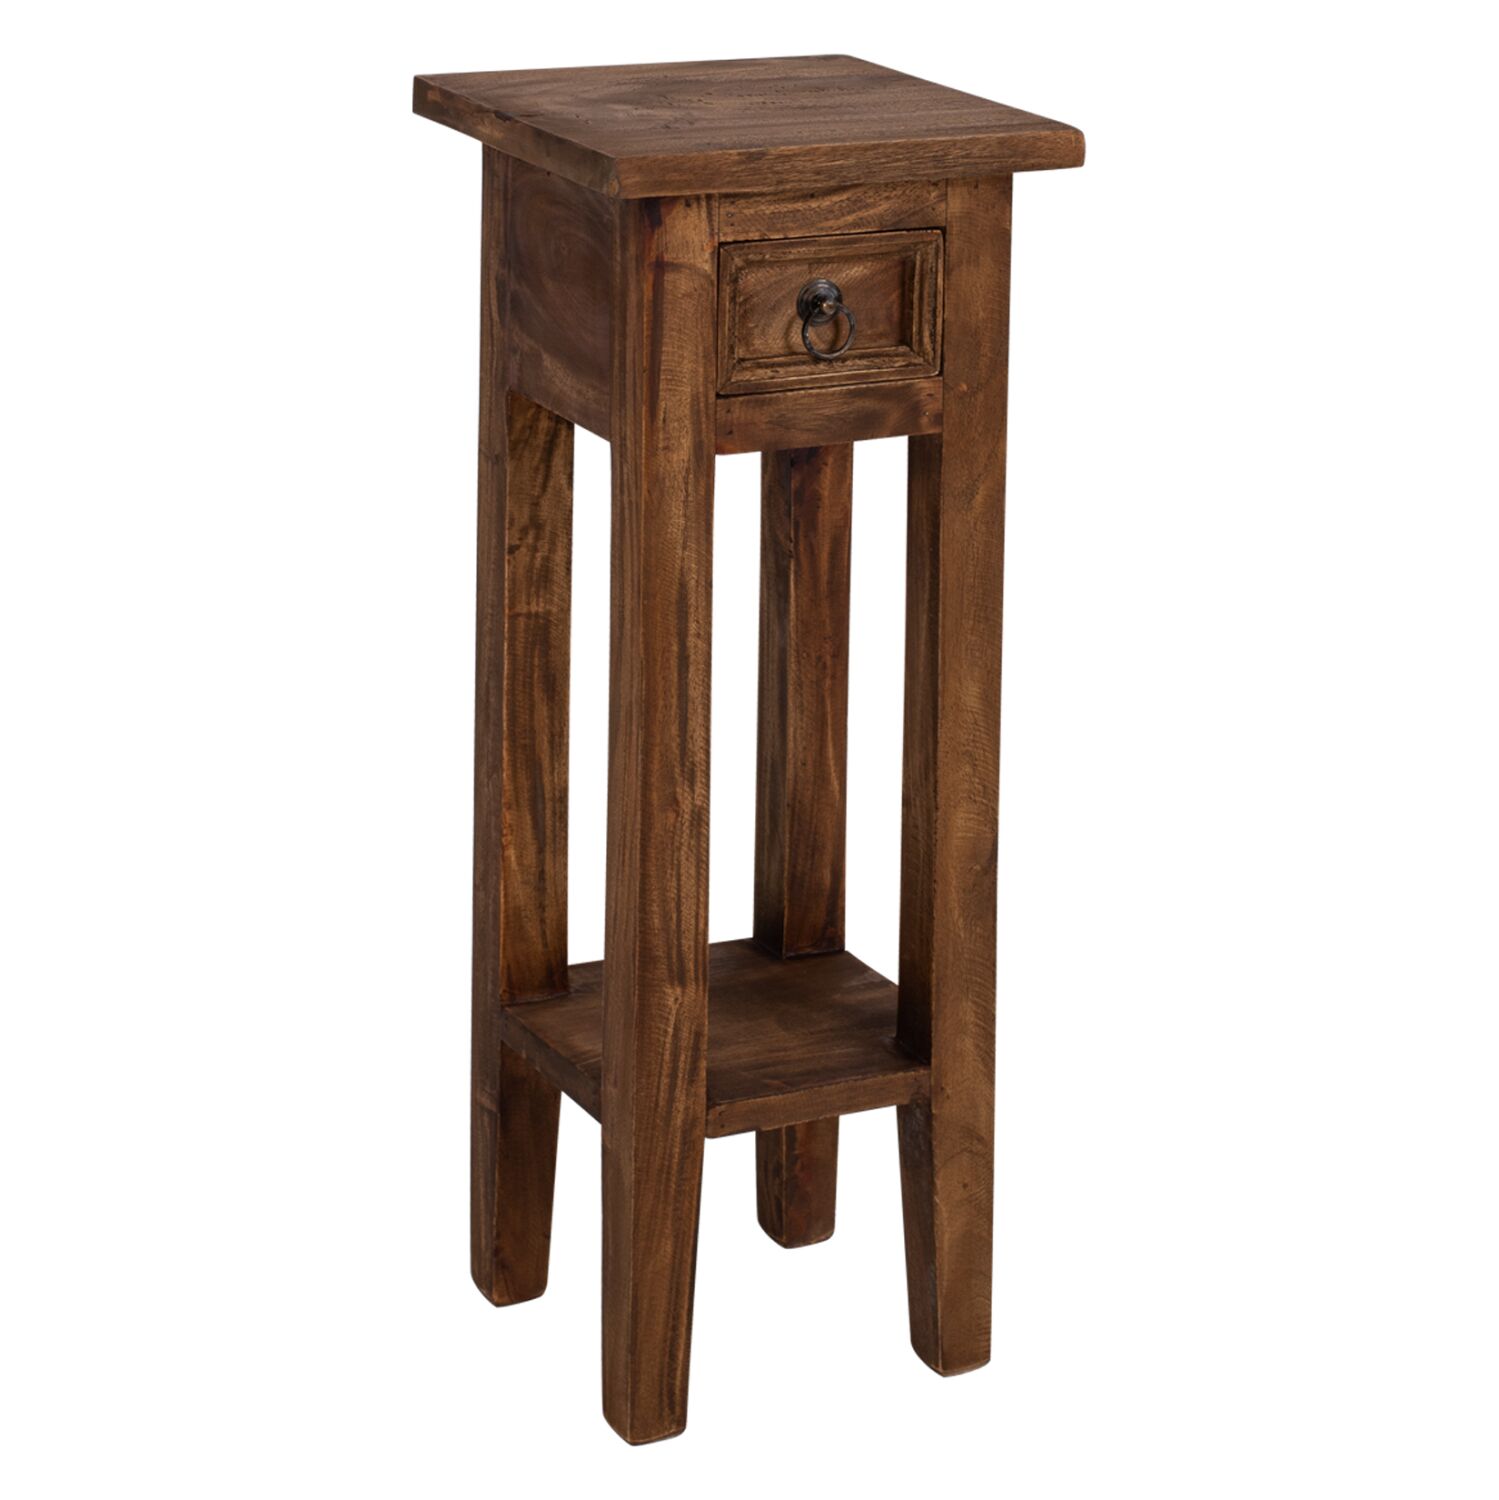 SIDE TABLE MADE OF MAHOGANY WOOD WITH A DRAWER IN NATURAL COLOR 25x25x66,5Hcm.HM9484.01